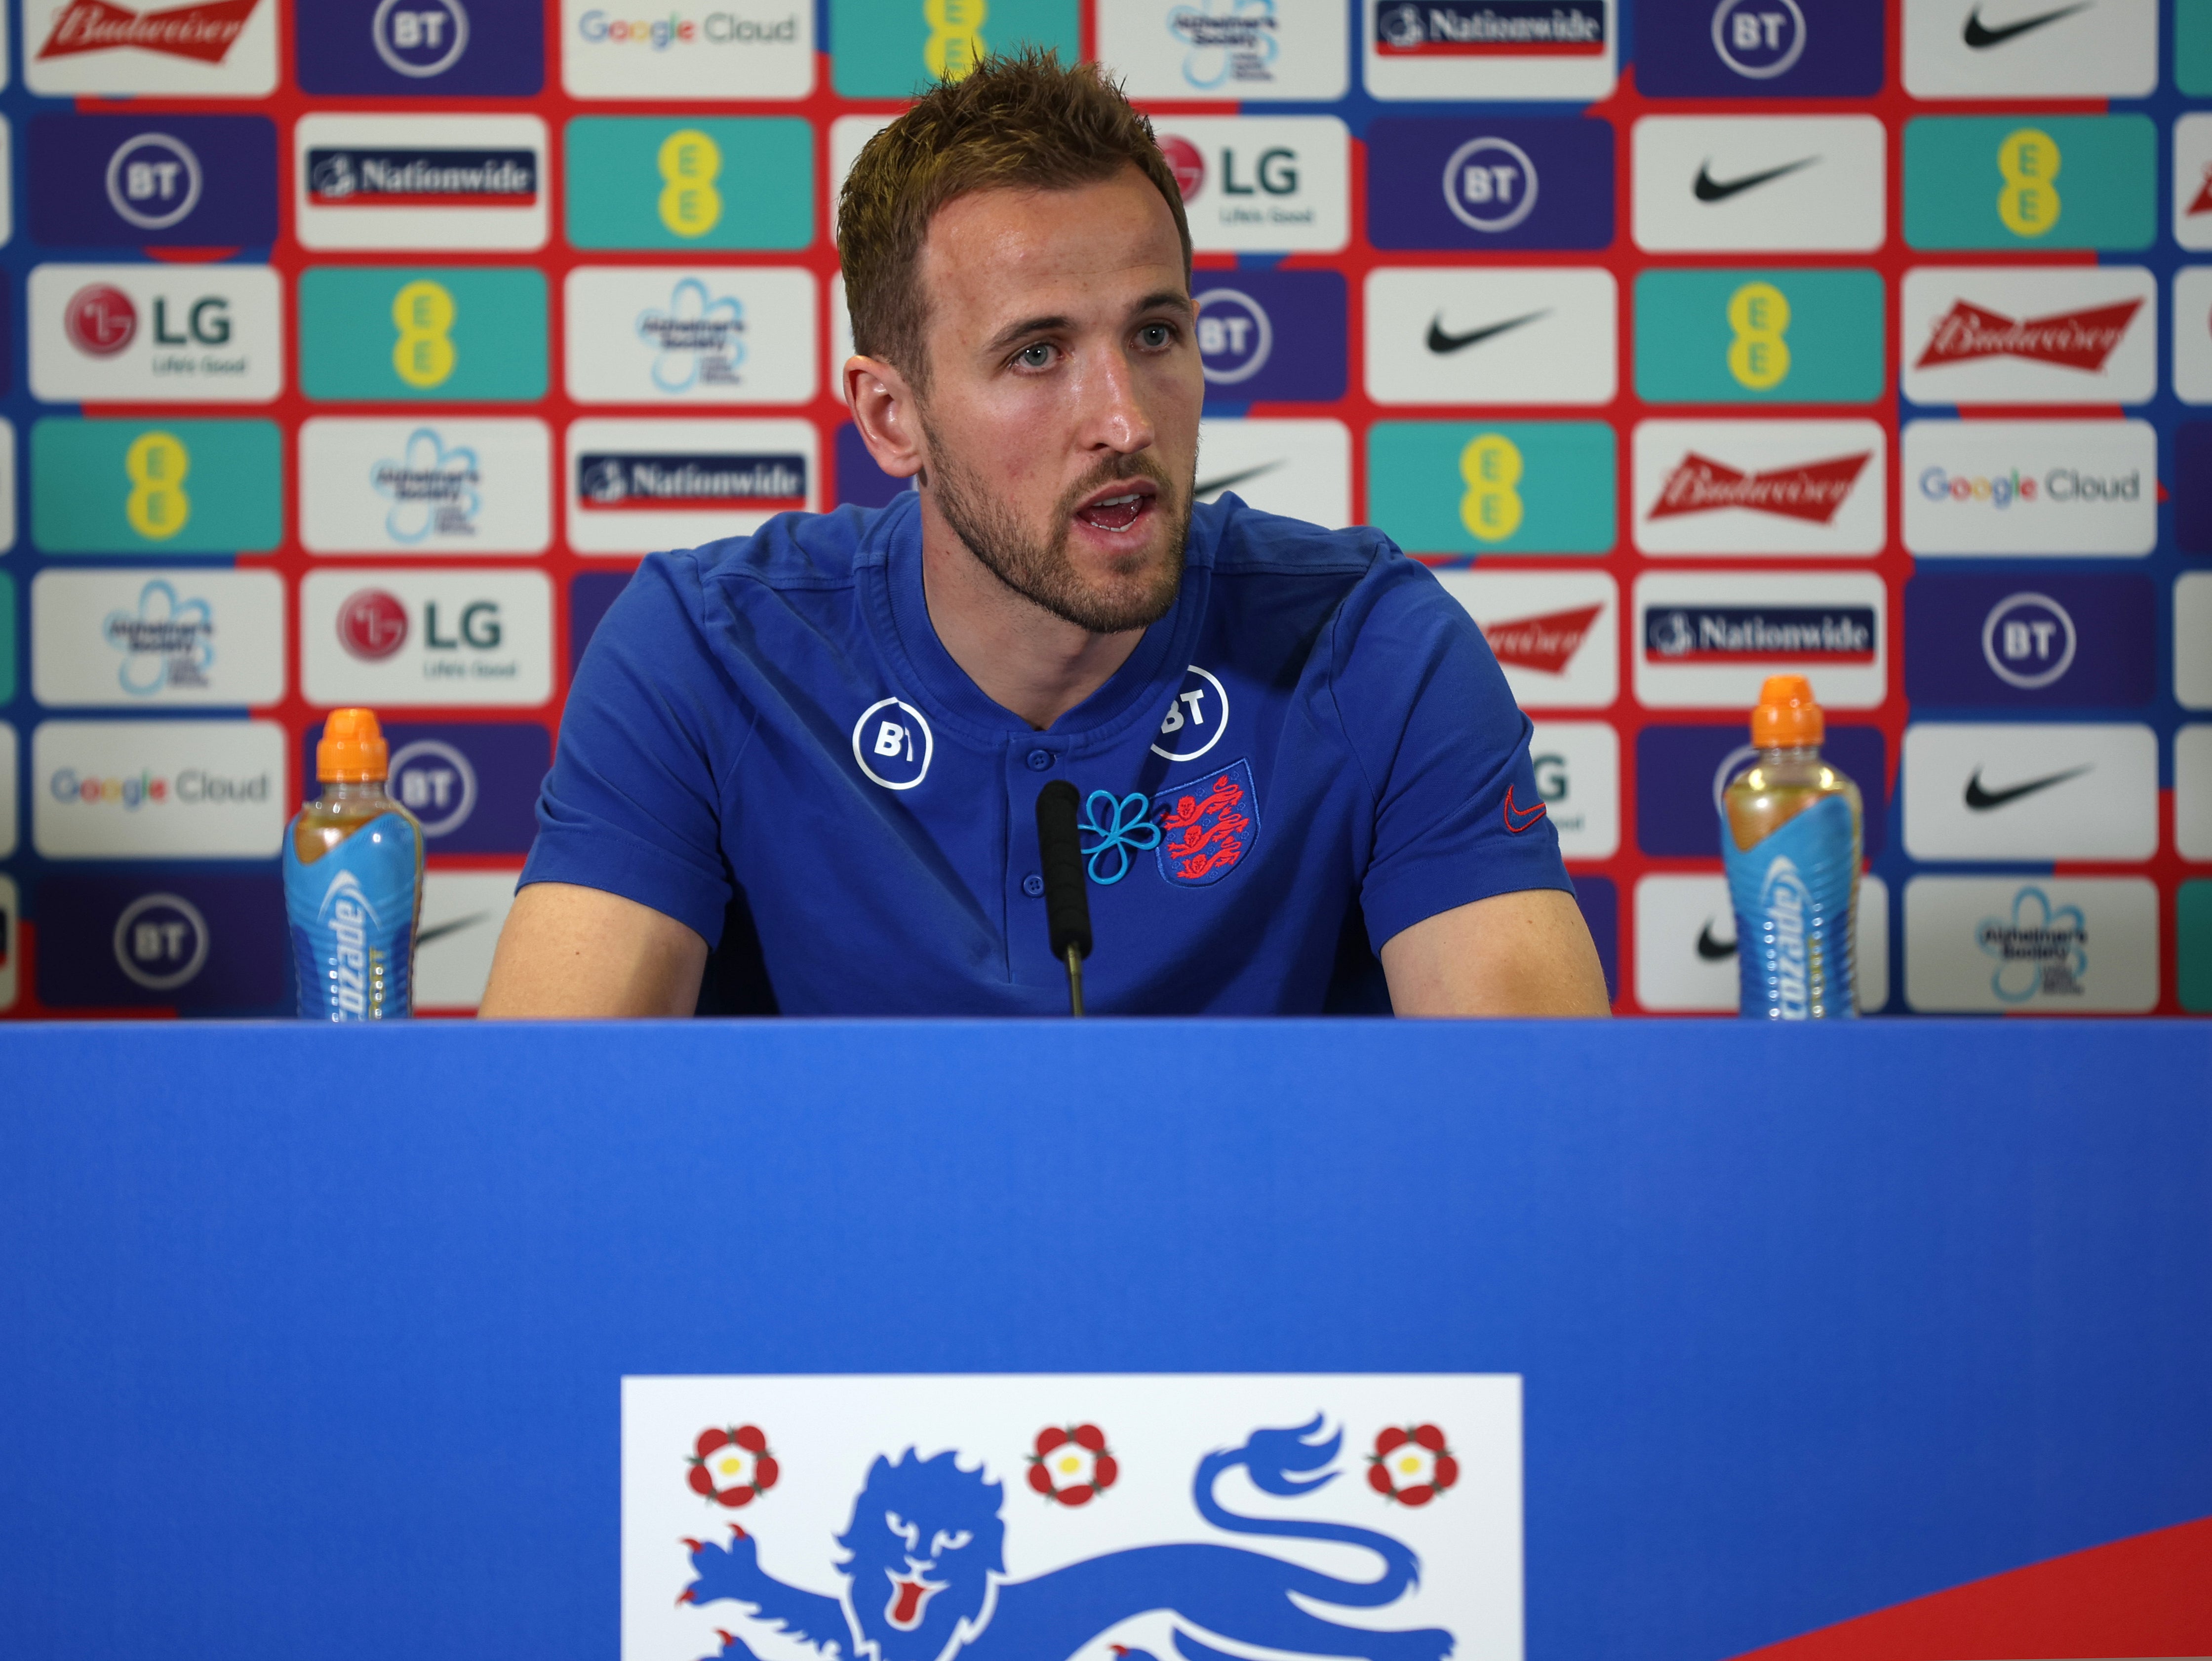 Harry Kane, the England captain, fielded questions on the World Cup in Qatar earlier this week